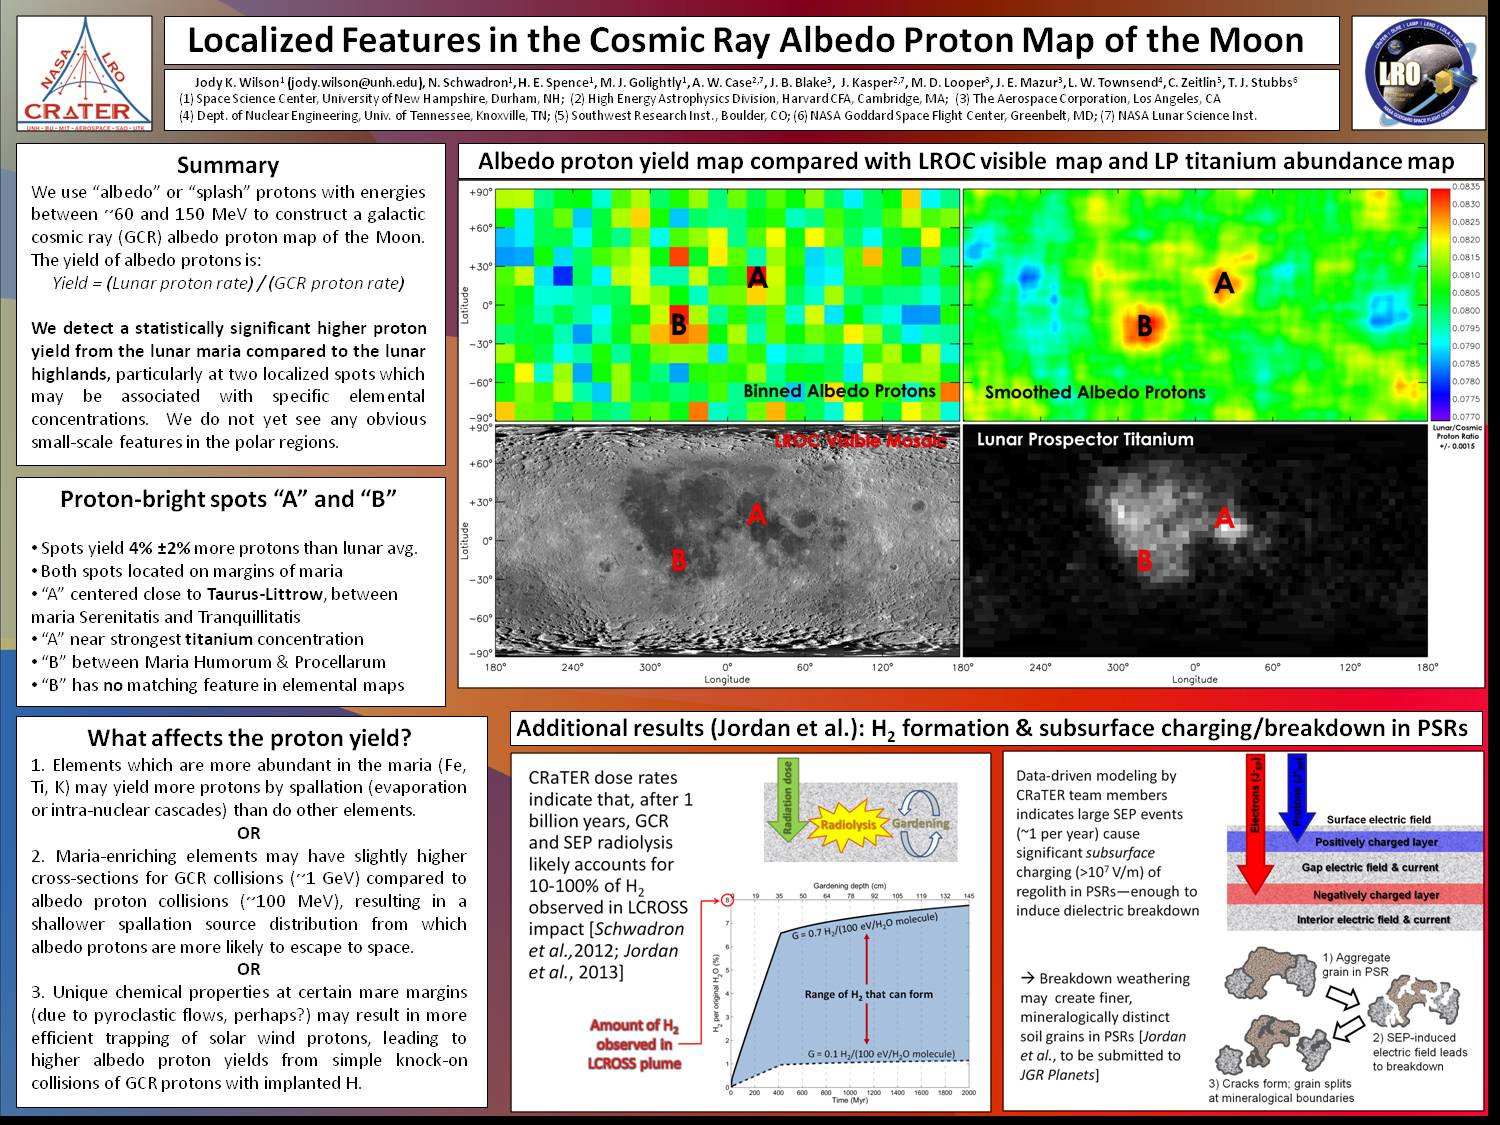 Localized Features In The Cosmic Ray Albedo Proton Map Of The Moon by jkwilson